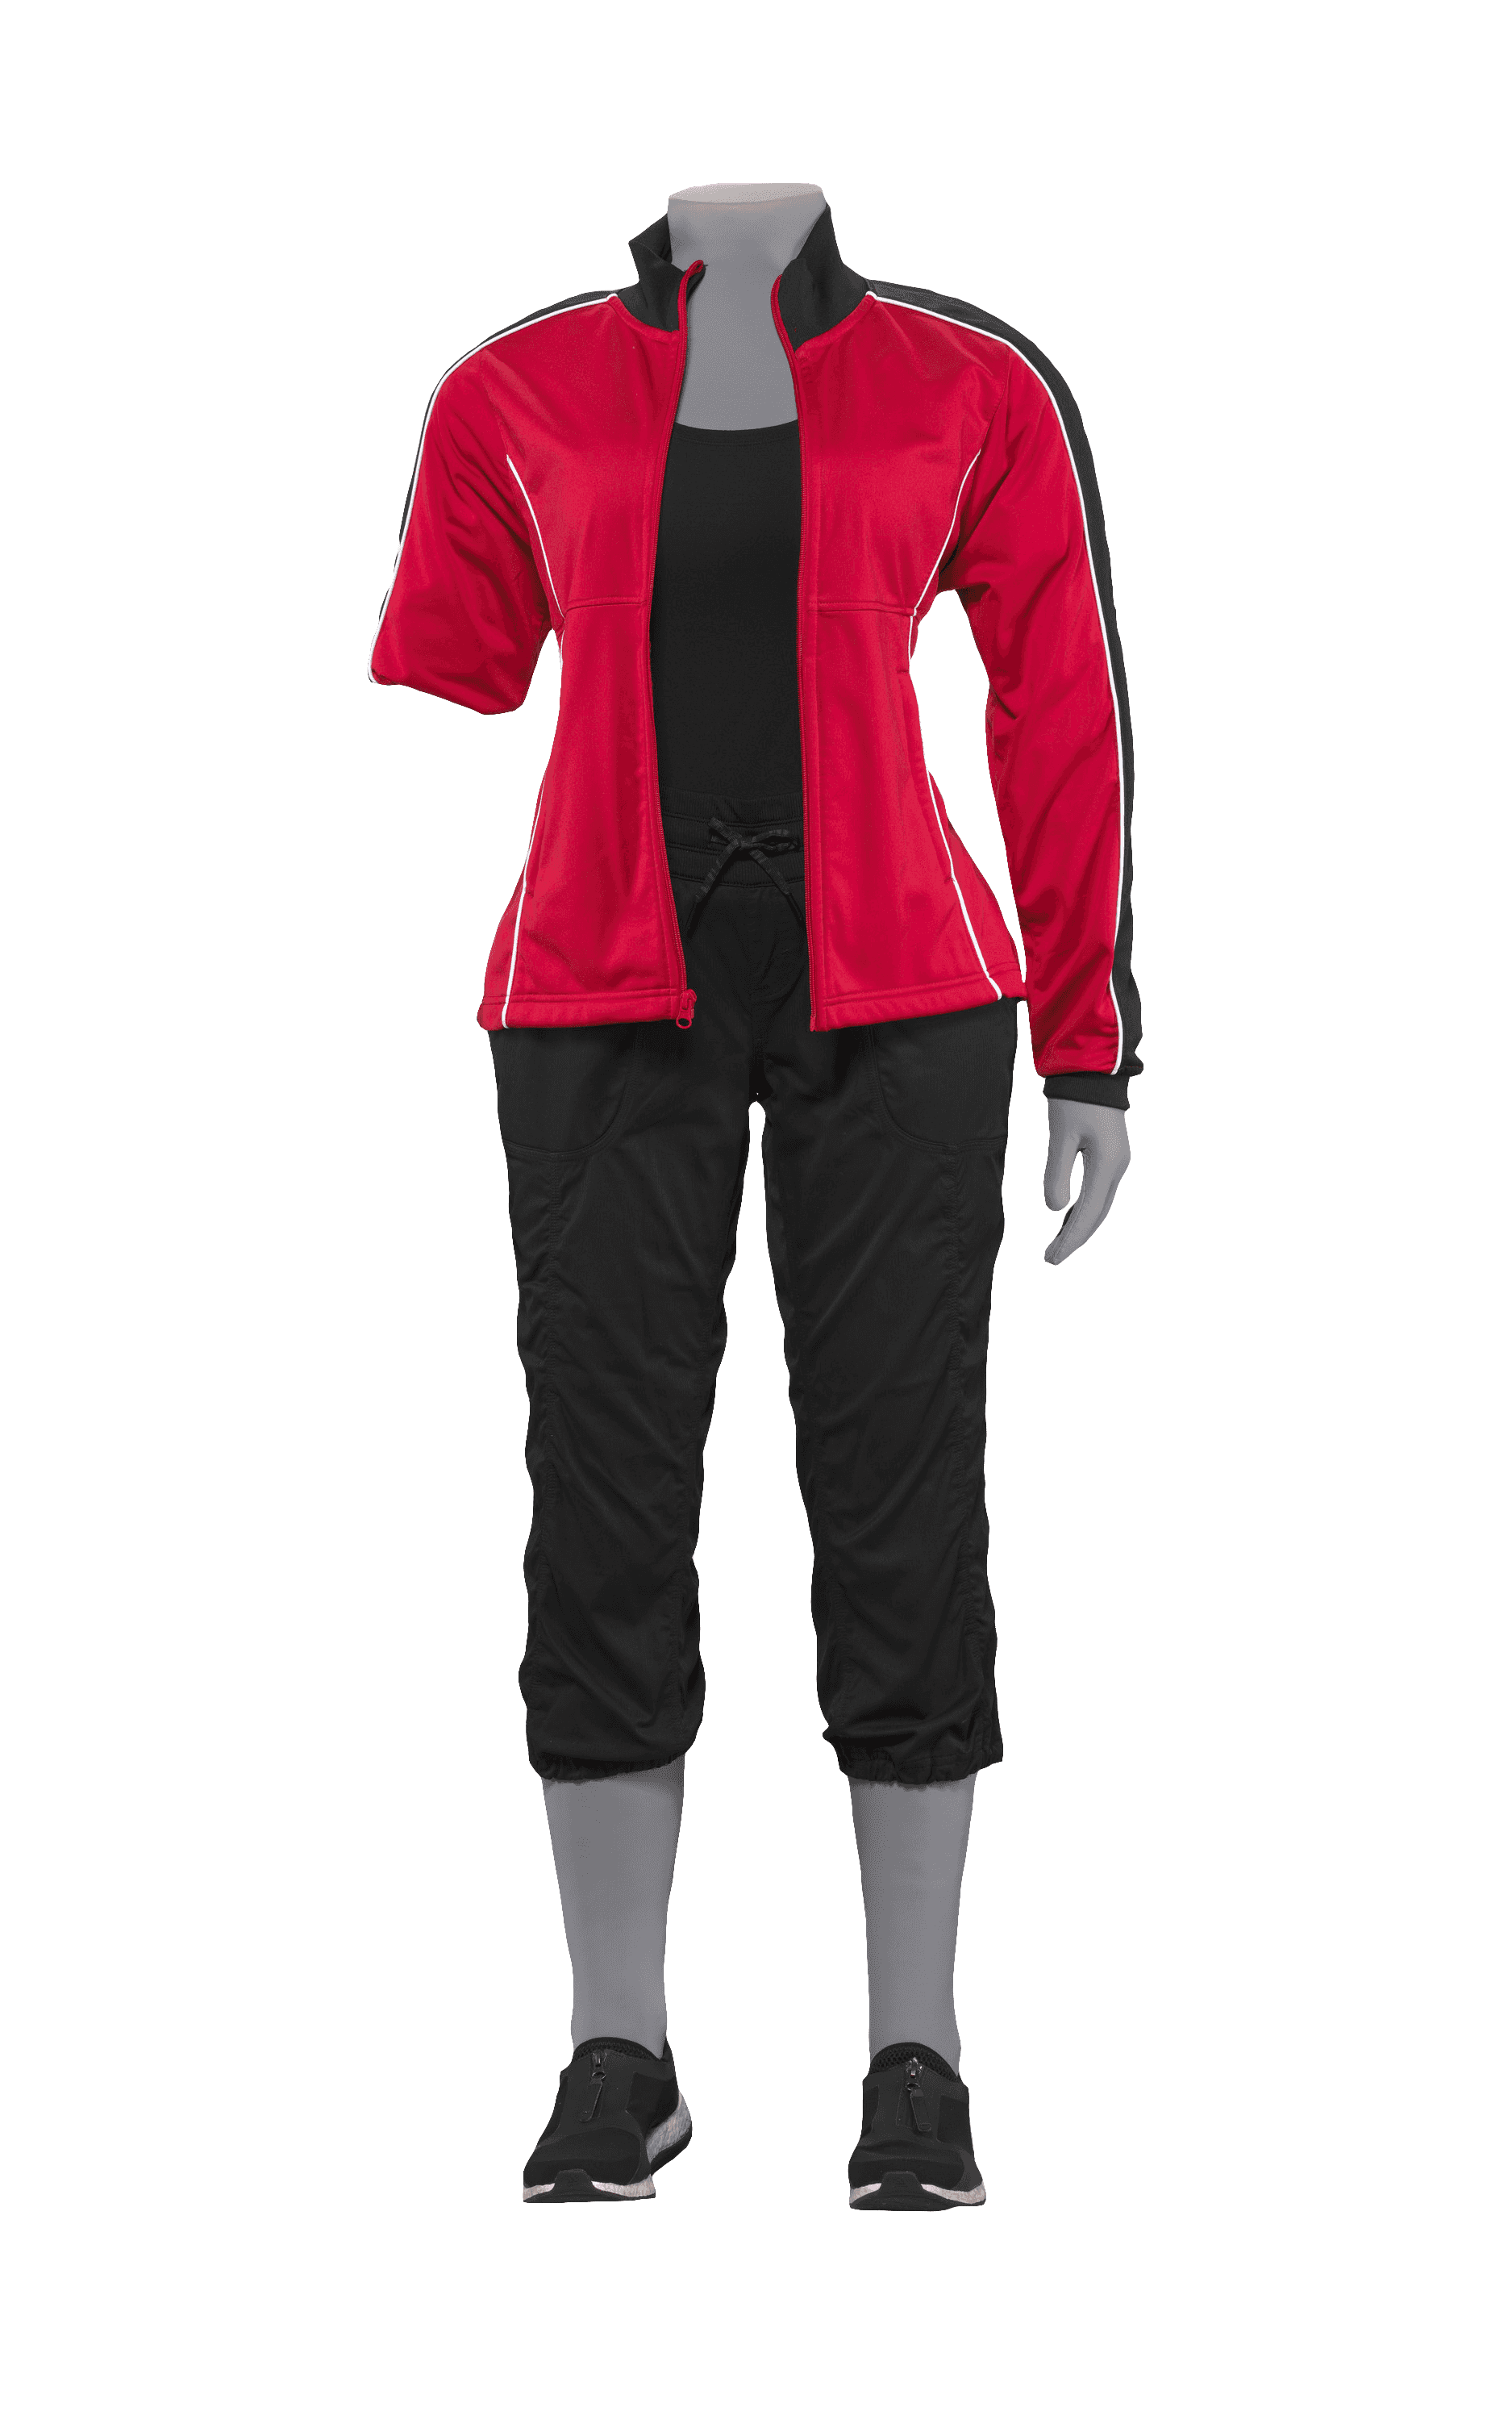 Misty Knight's one sleeved red jacket, black pants, and black tennis shoes from Marvel's Luke Cage.